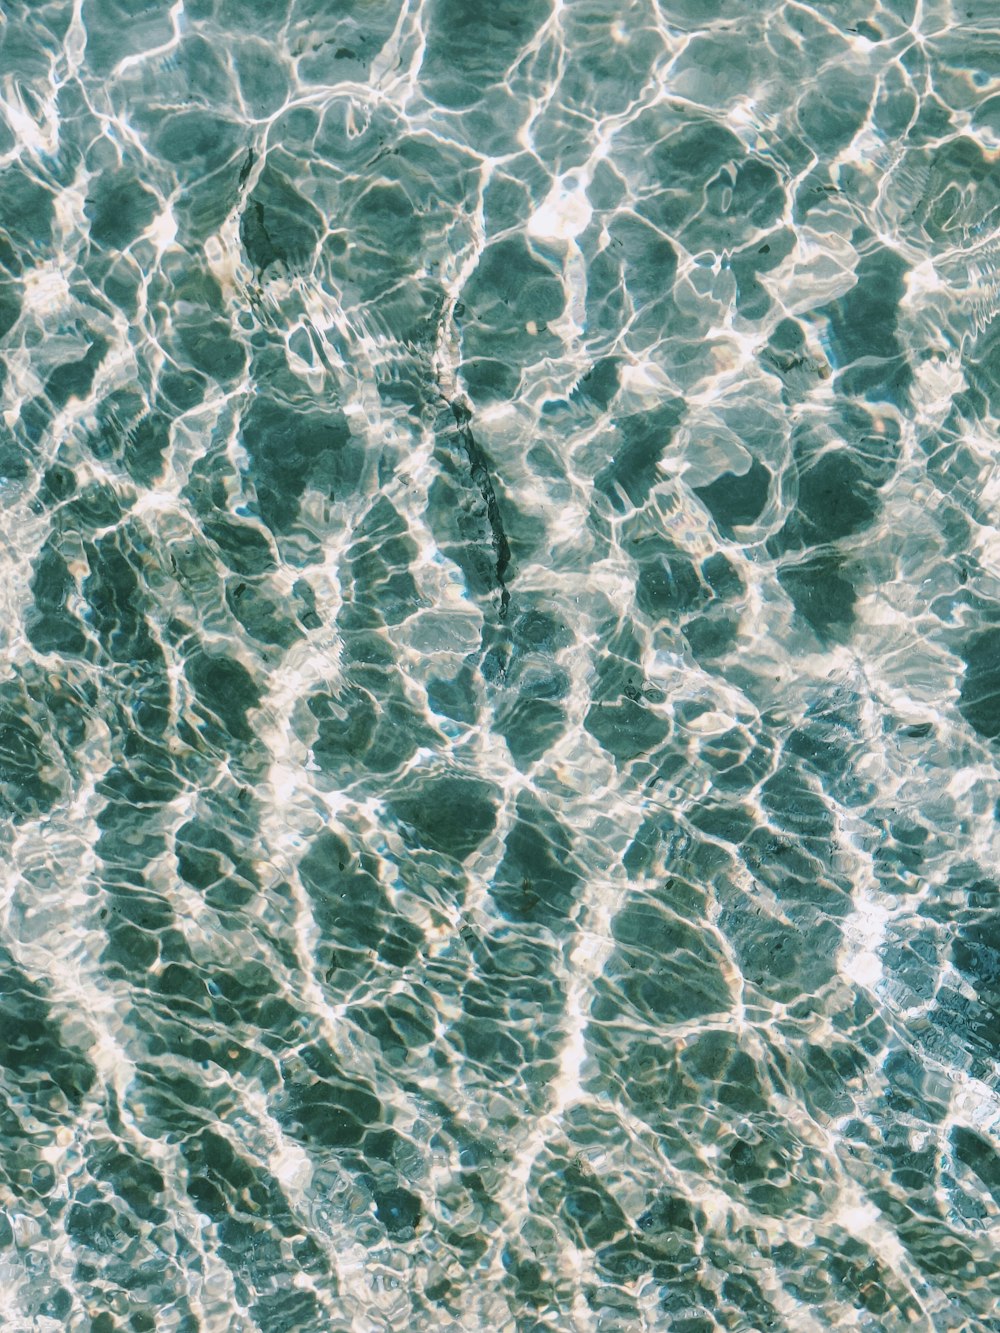 a close up of some water